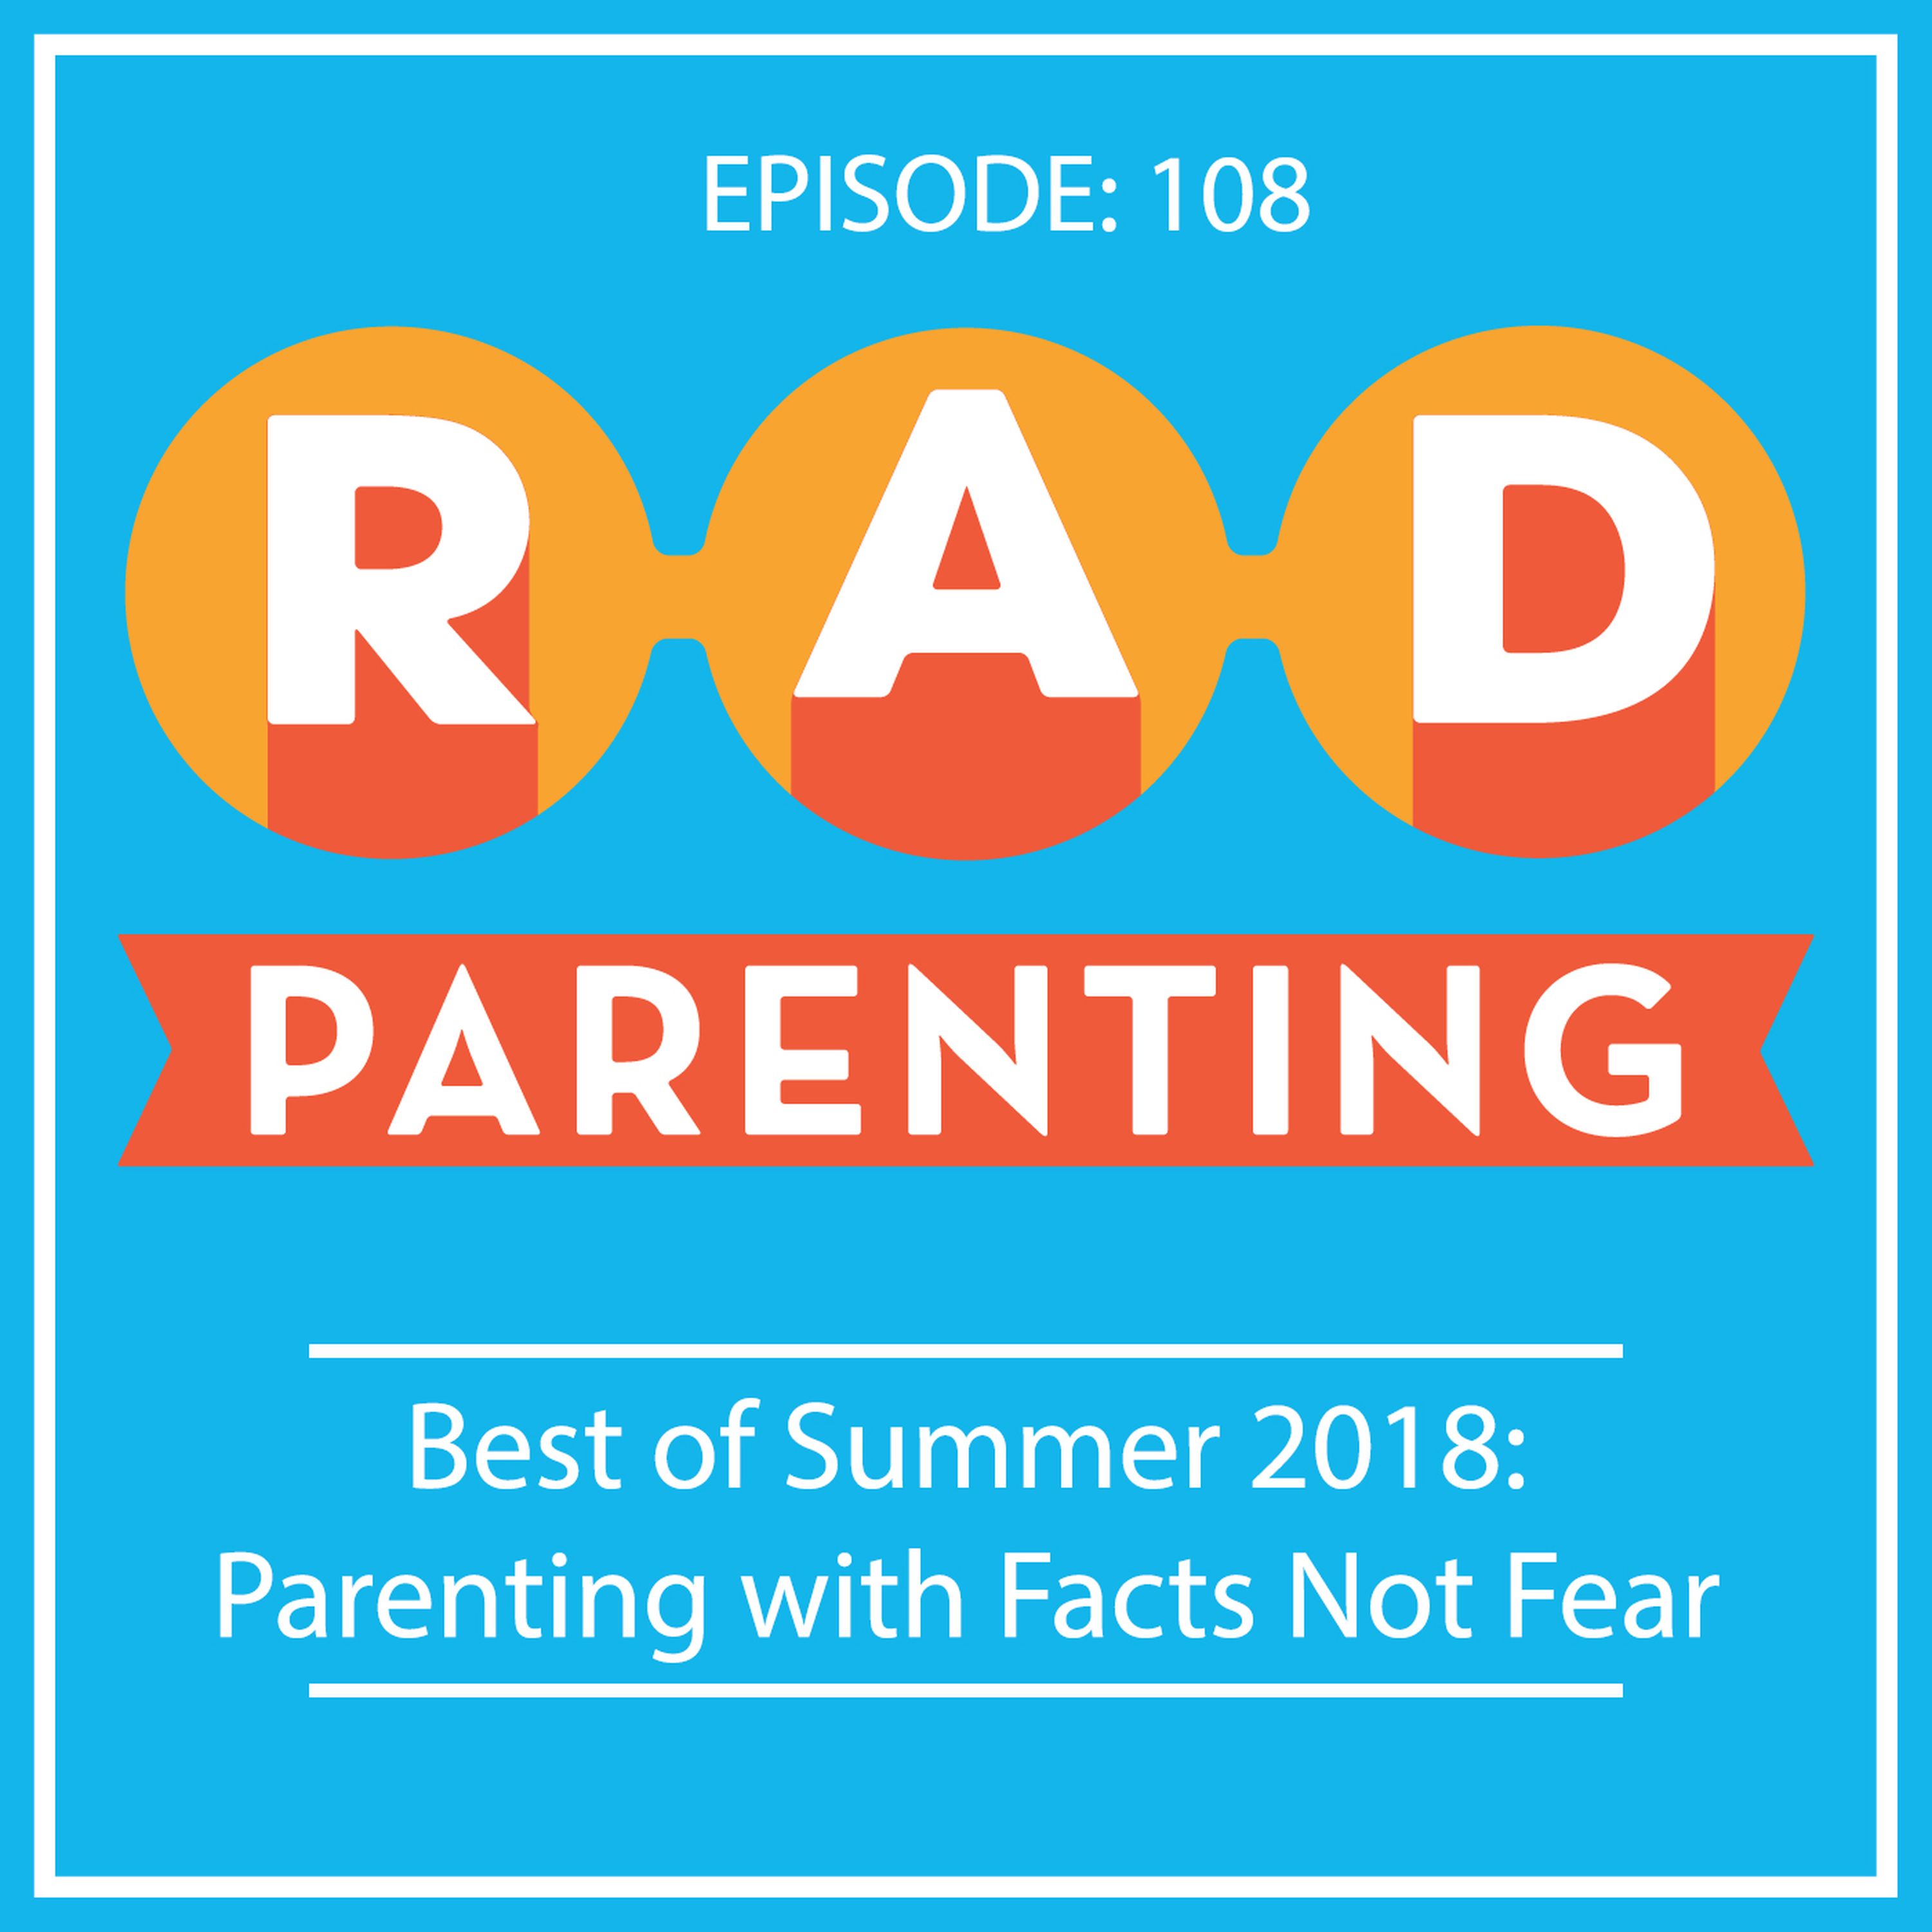 Best of Summer 2018:Parenting with Facts Not Fear